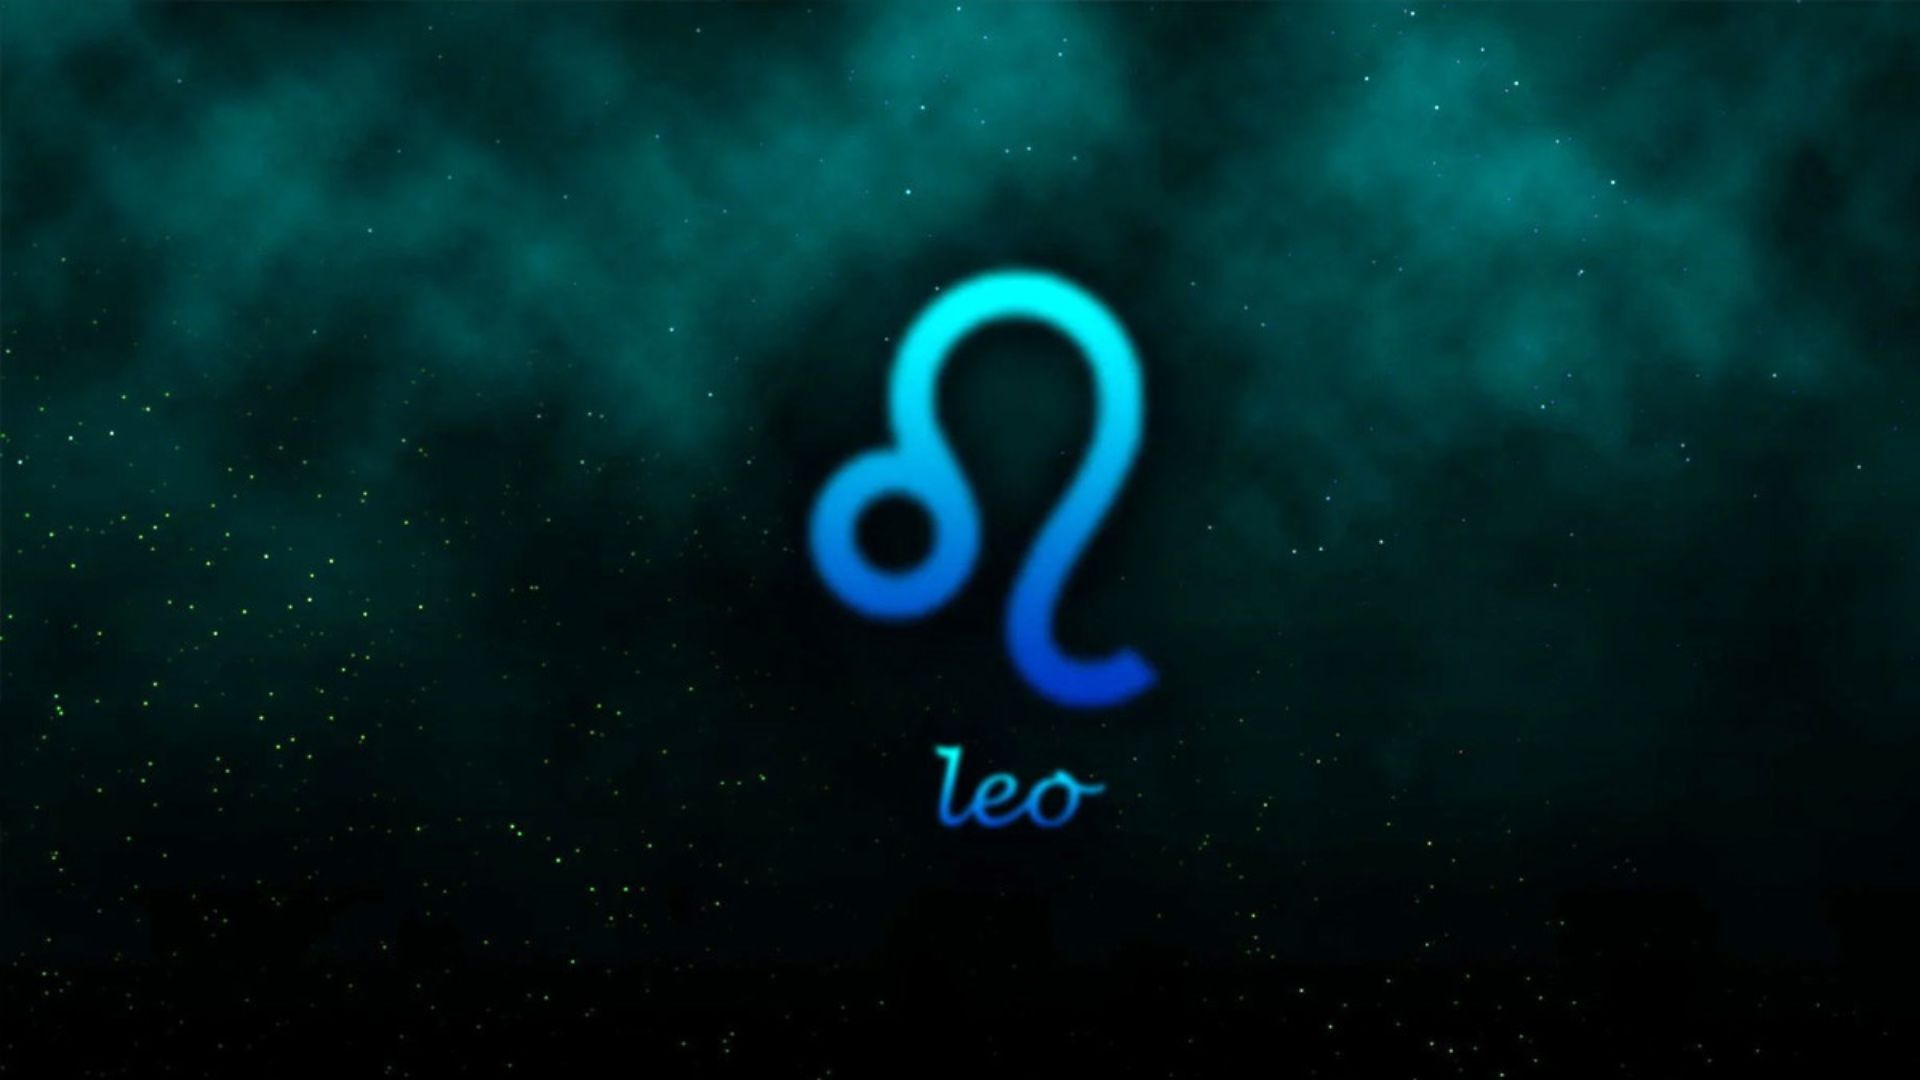 Leo Sign In Sky With Stars In The Background